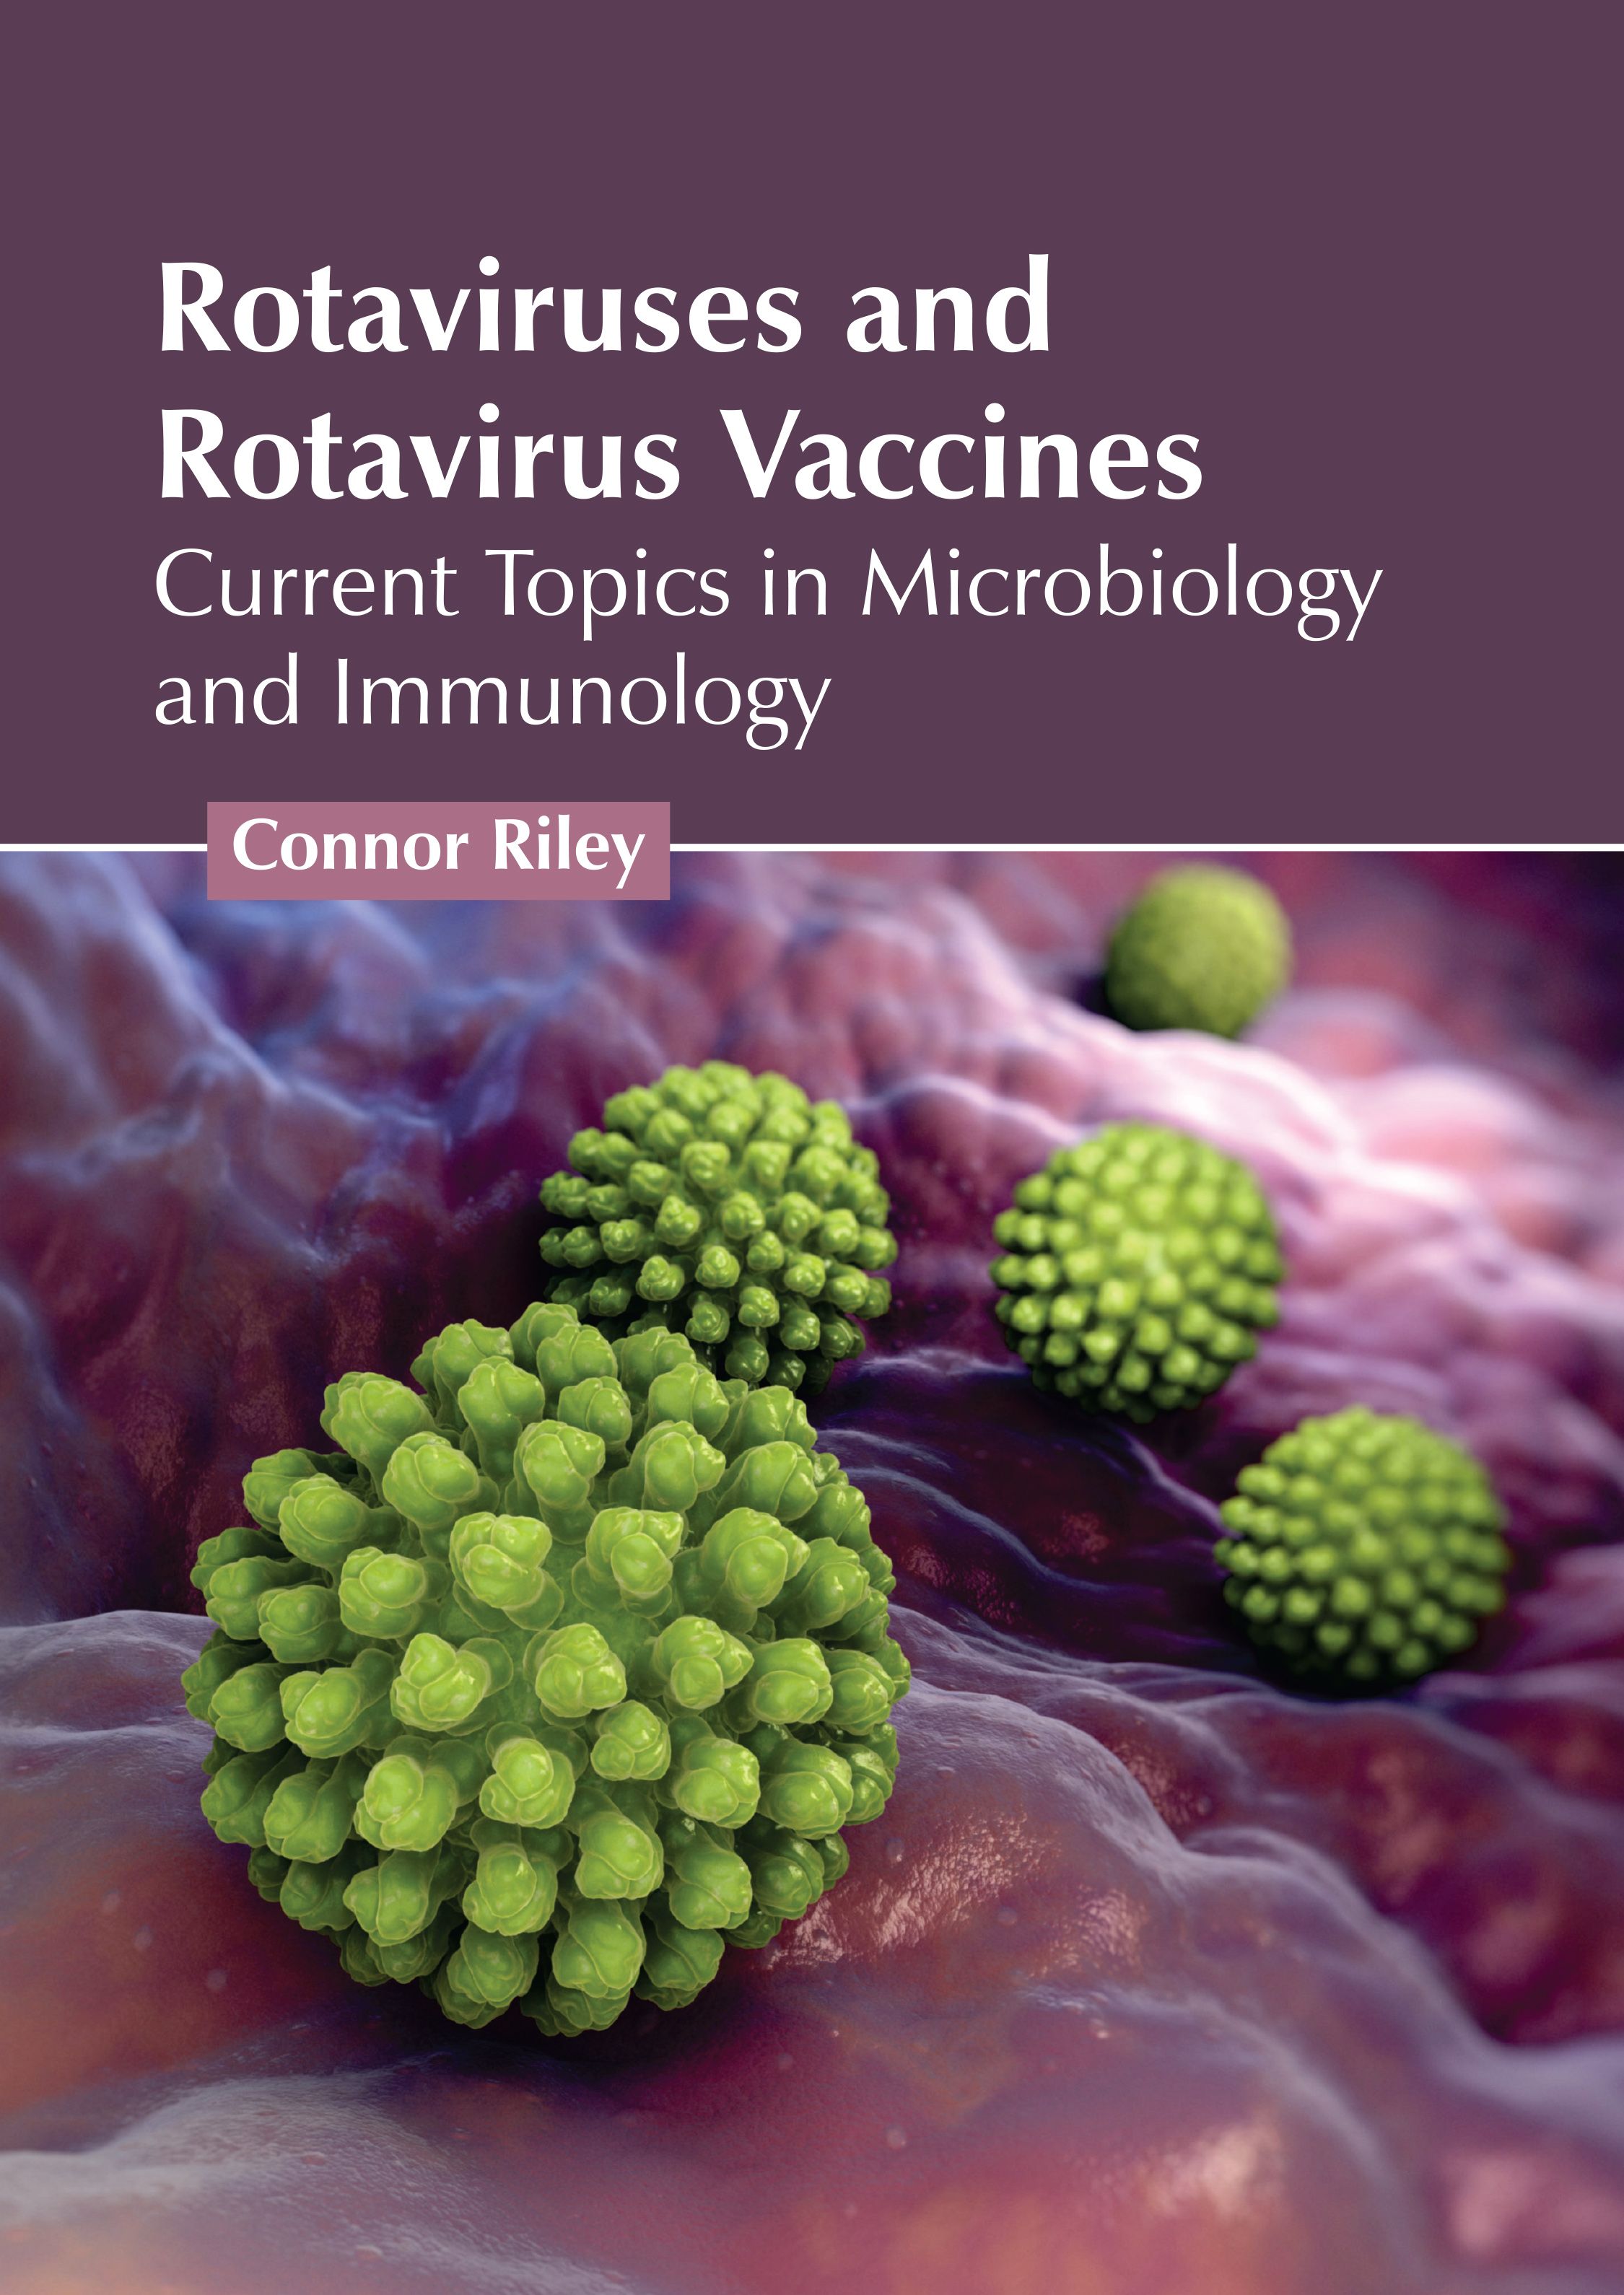 

exclusive-publishers/american-medical-publishers/rotaviruses-and-rotavirus-vaccines-current-topics-in-microbiology-and-immunology-9798887404448